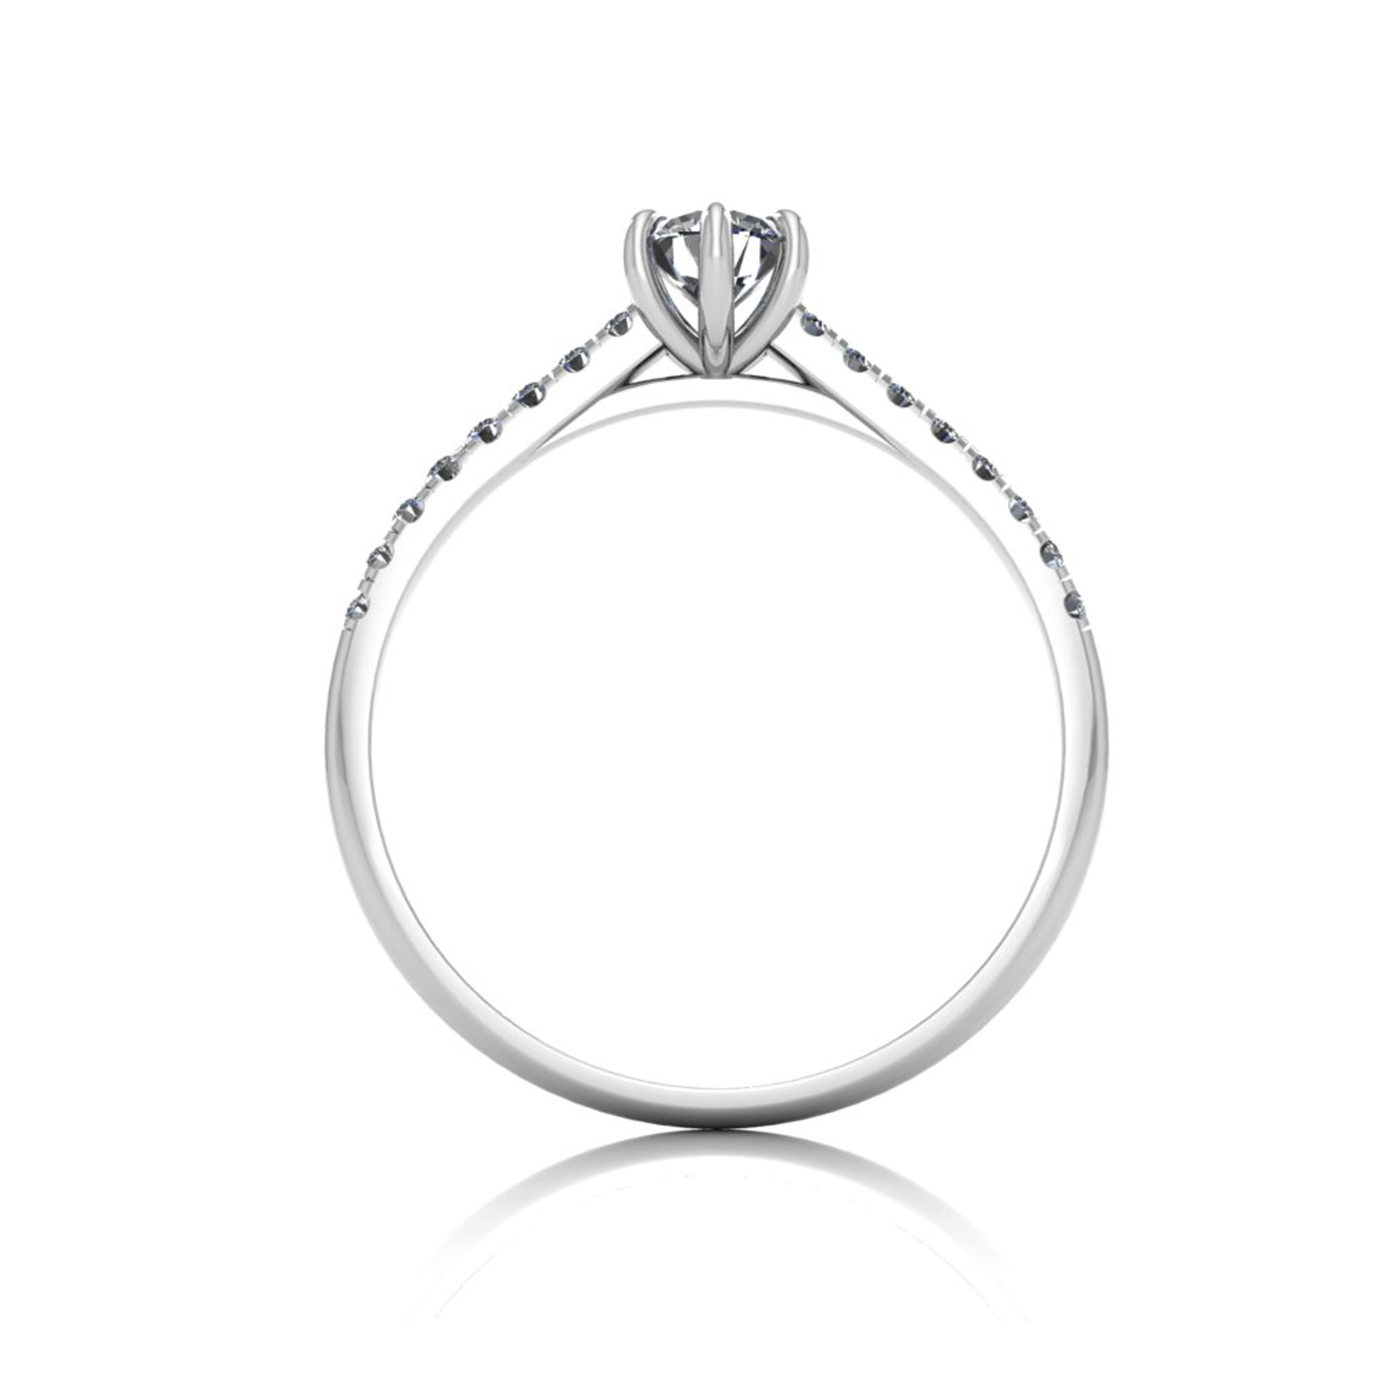 18k white gold 0,30 ct 6 prongs round cut diamond engagement ring with whisper thin pavÉ set band